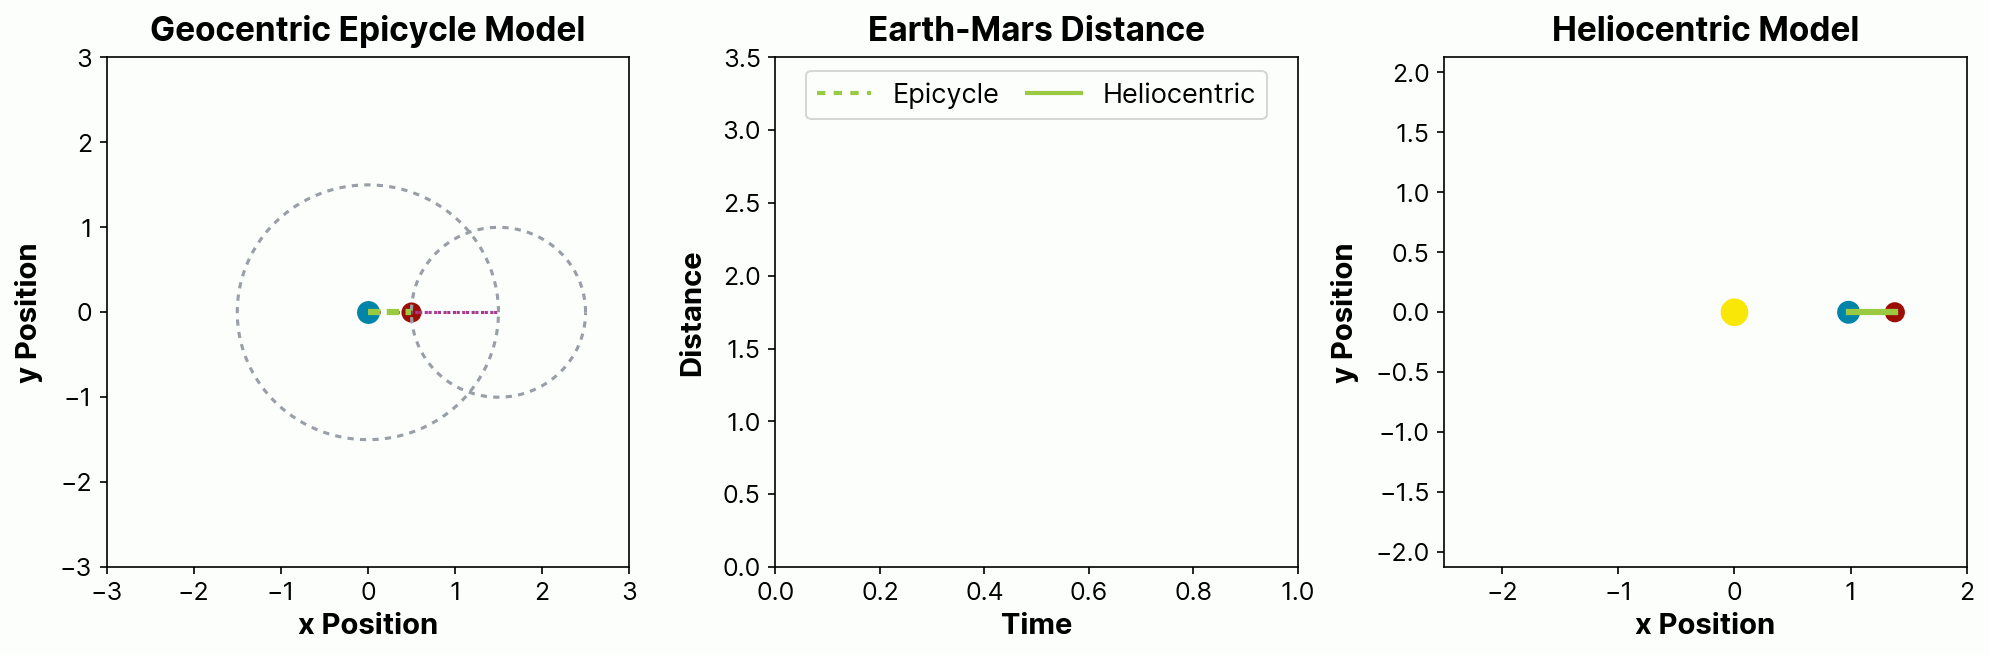 Animated GIF with three synchronized panels in a single horizontal row. Left: A geocentric epicycle model of Mars orbiting the Earth, showing a red trace for the historical path for Mars, the current Earth-Mars distance as a dashed green line, the deferent and epicycle circles in gray, and a representation of how Mars’s position is calculated in purple. Right: A heliocentric elliptical-orbit model of Mars and Earth orbiting the Sun, showing the current Earth-Mars distance as a solid green line. Center: A time-series plot of the Earth-Mars distances from the two models, showing a good but imperfect match.